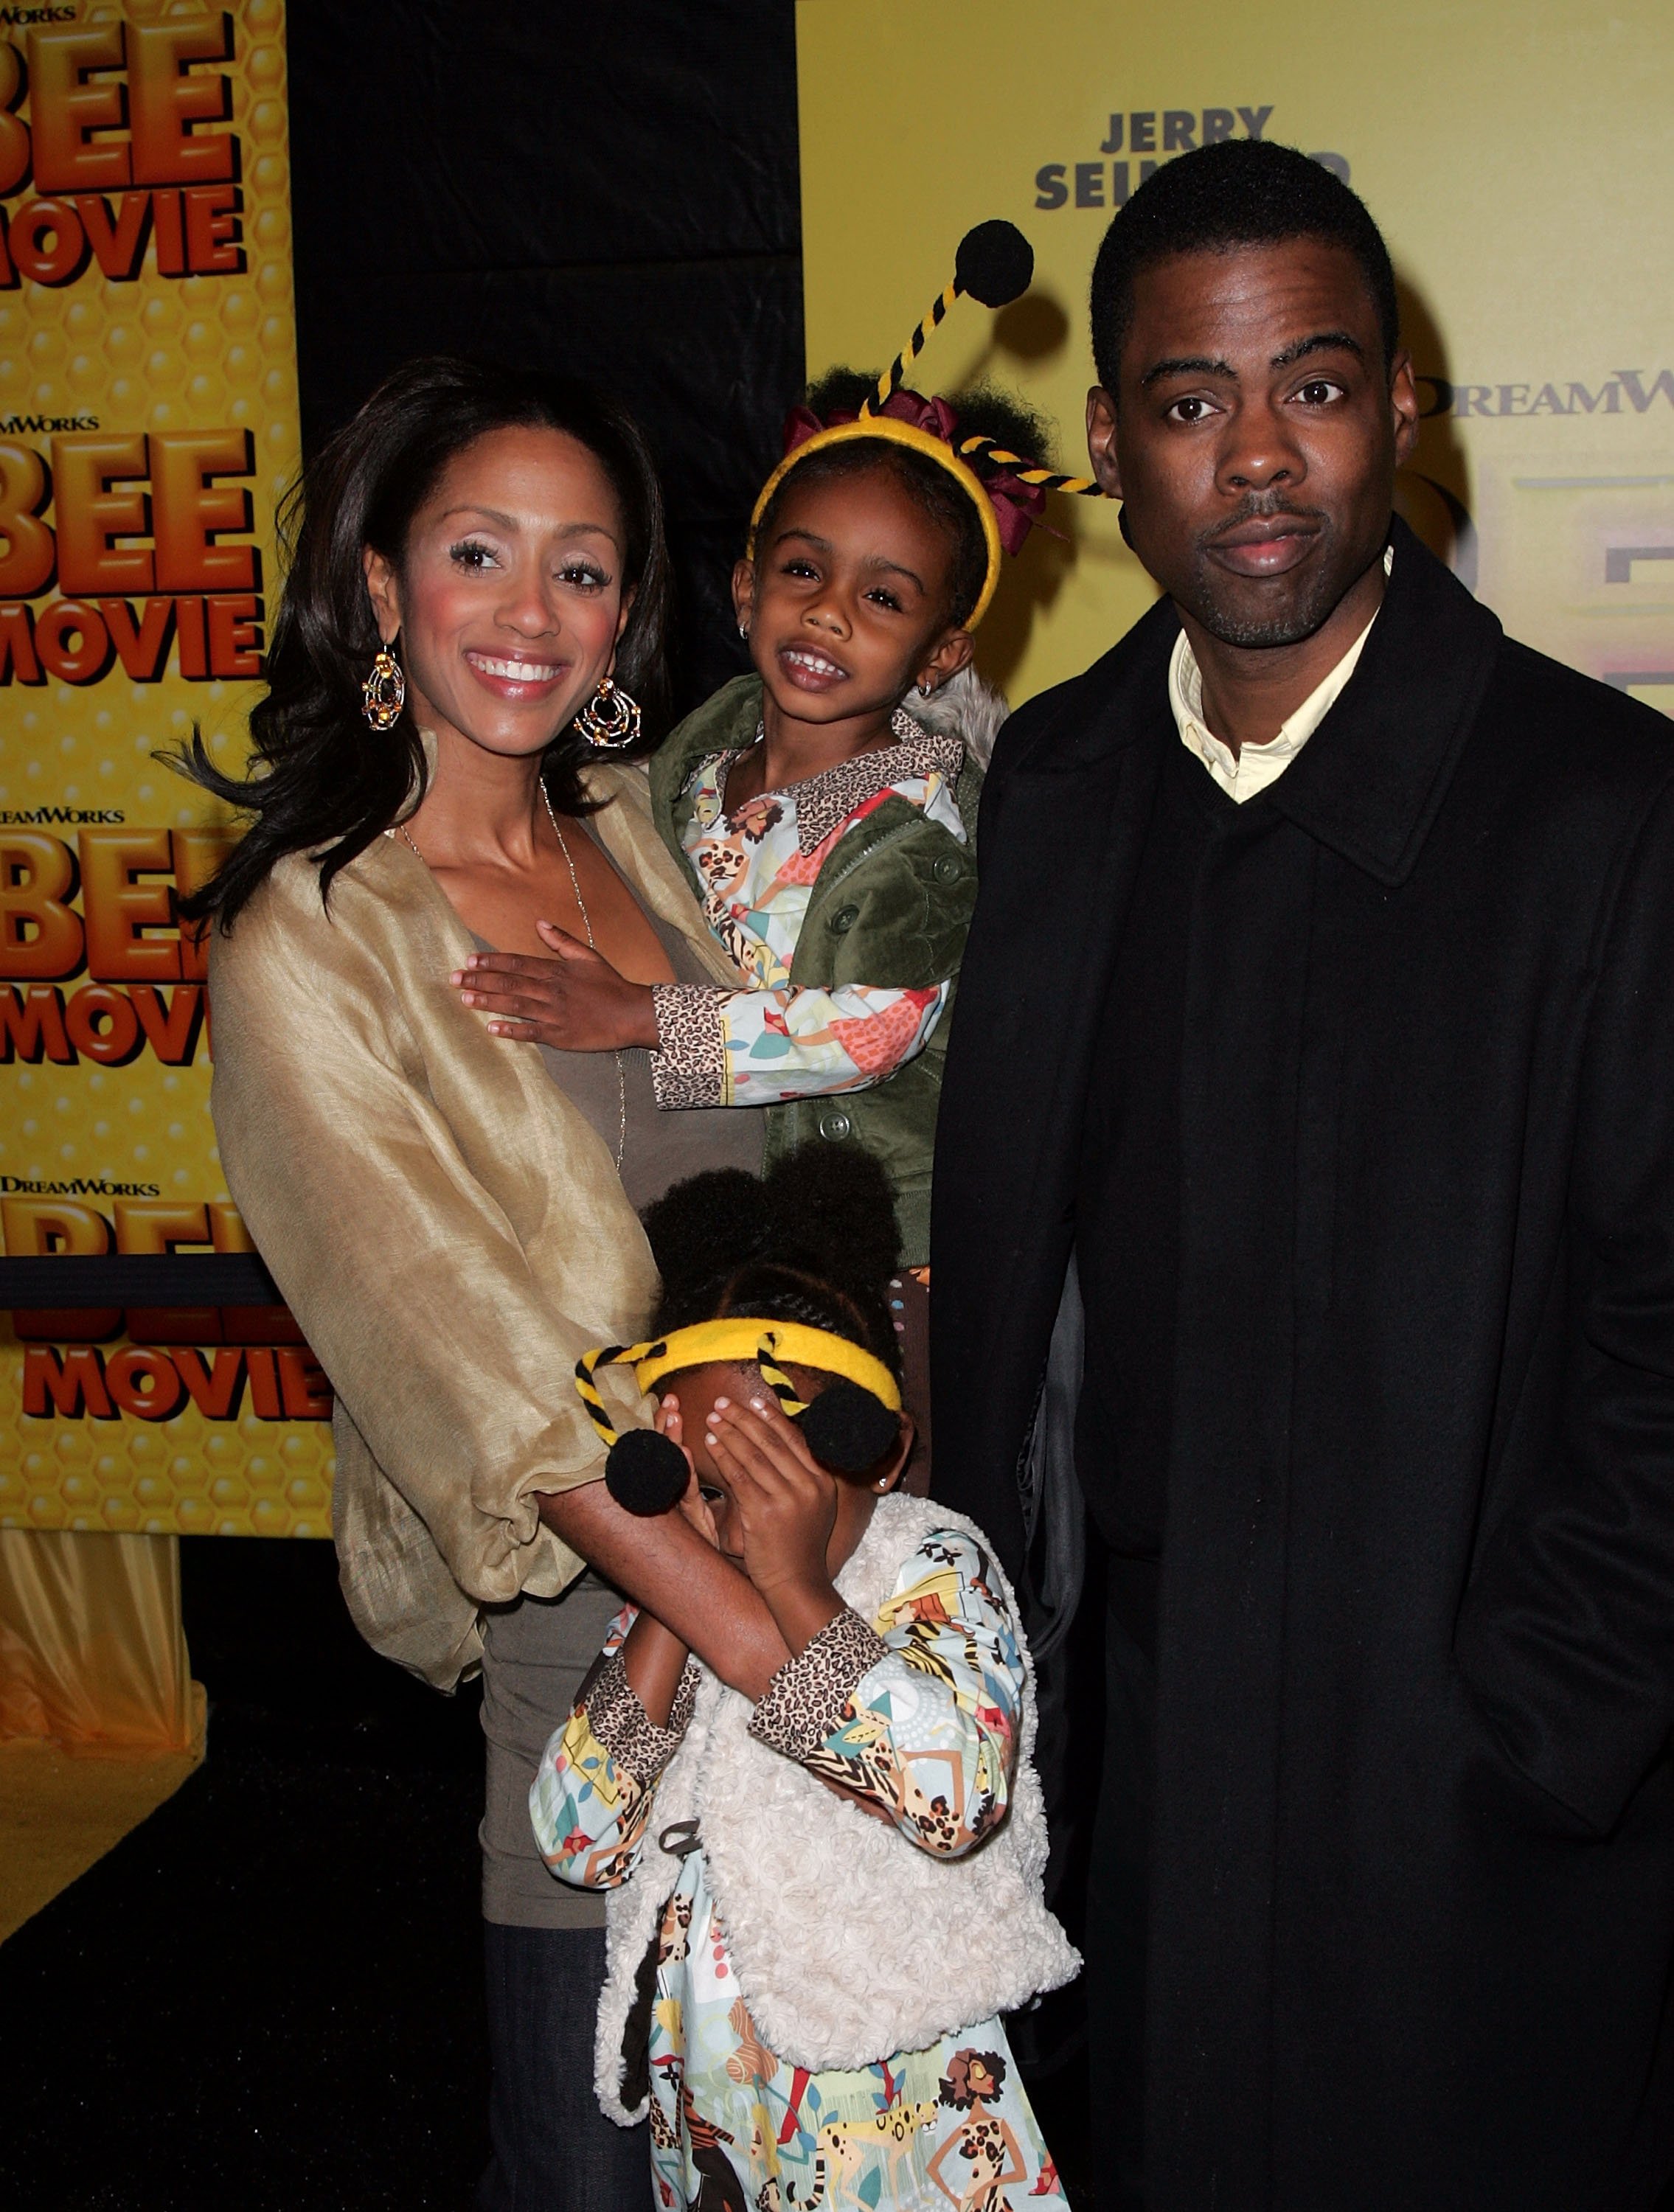 Malaak Compton-Rock, Chris Rock, and children arrive at the Bee Movie Premiere at Loews Lincoln Square on October 25, 2007, in New York. | Source: Getty Images